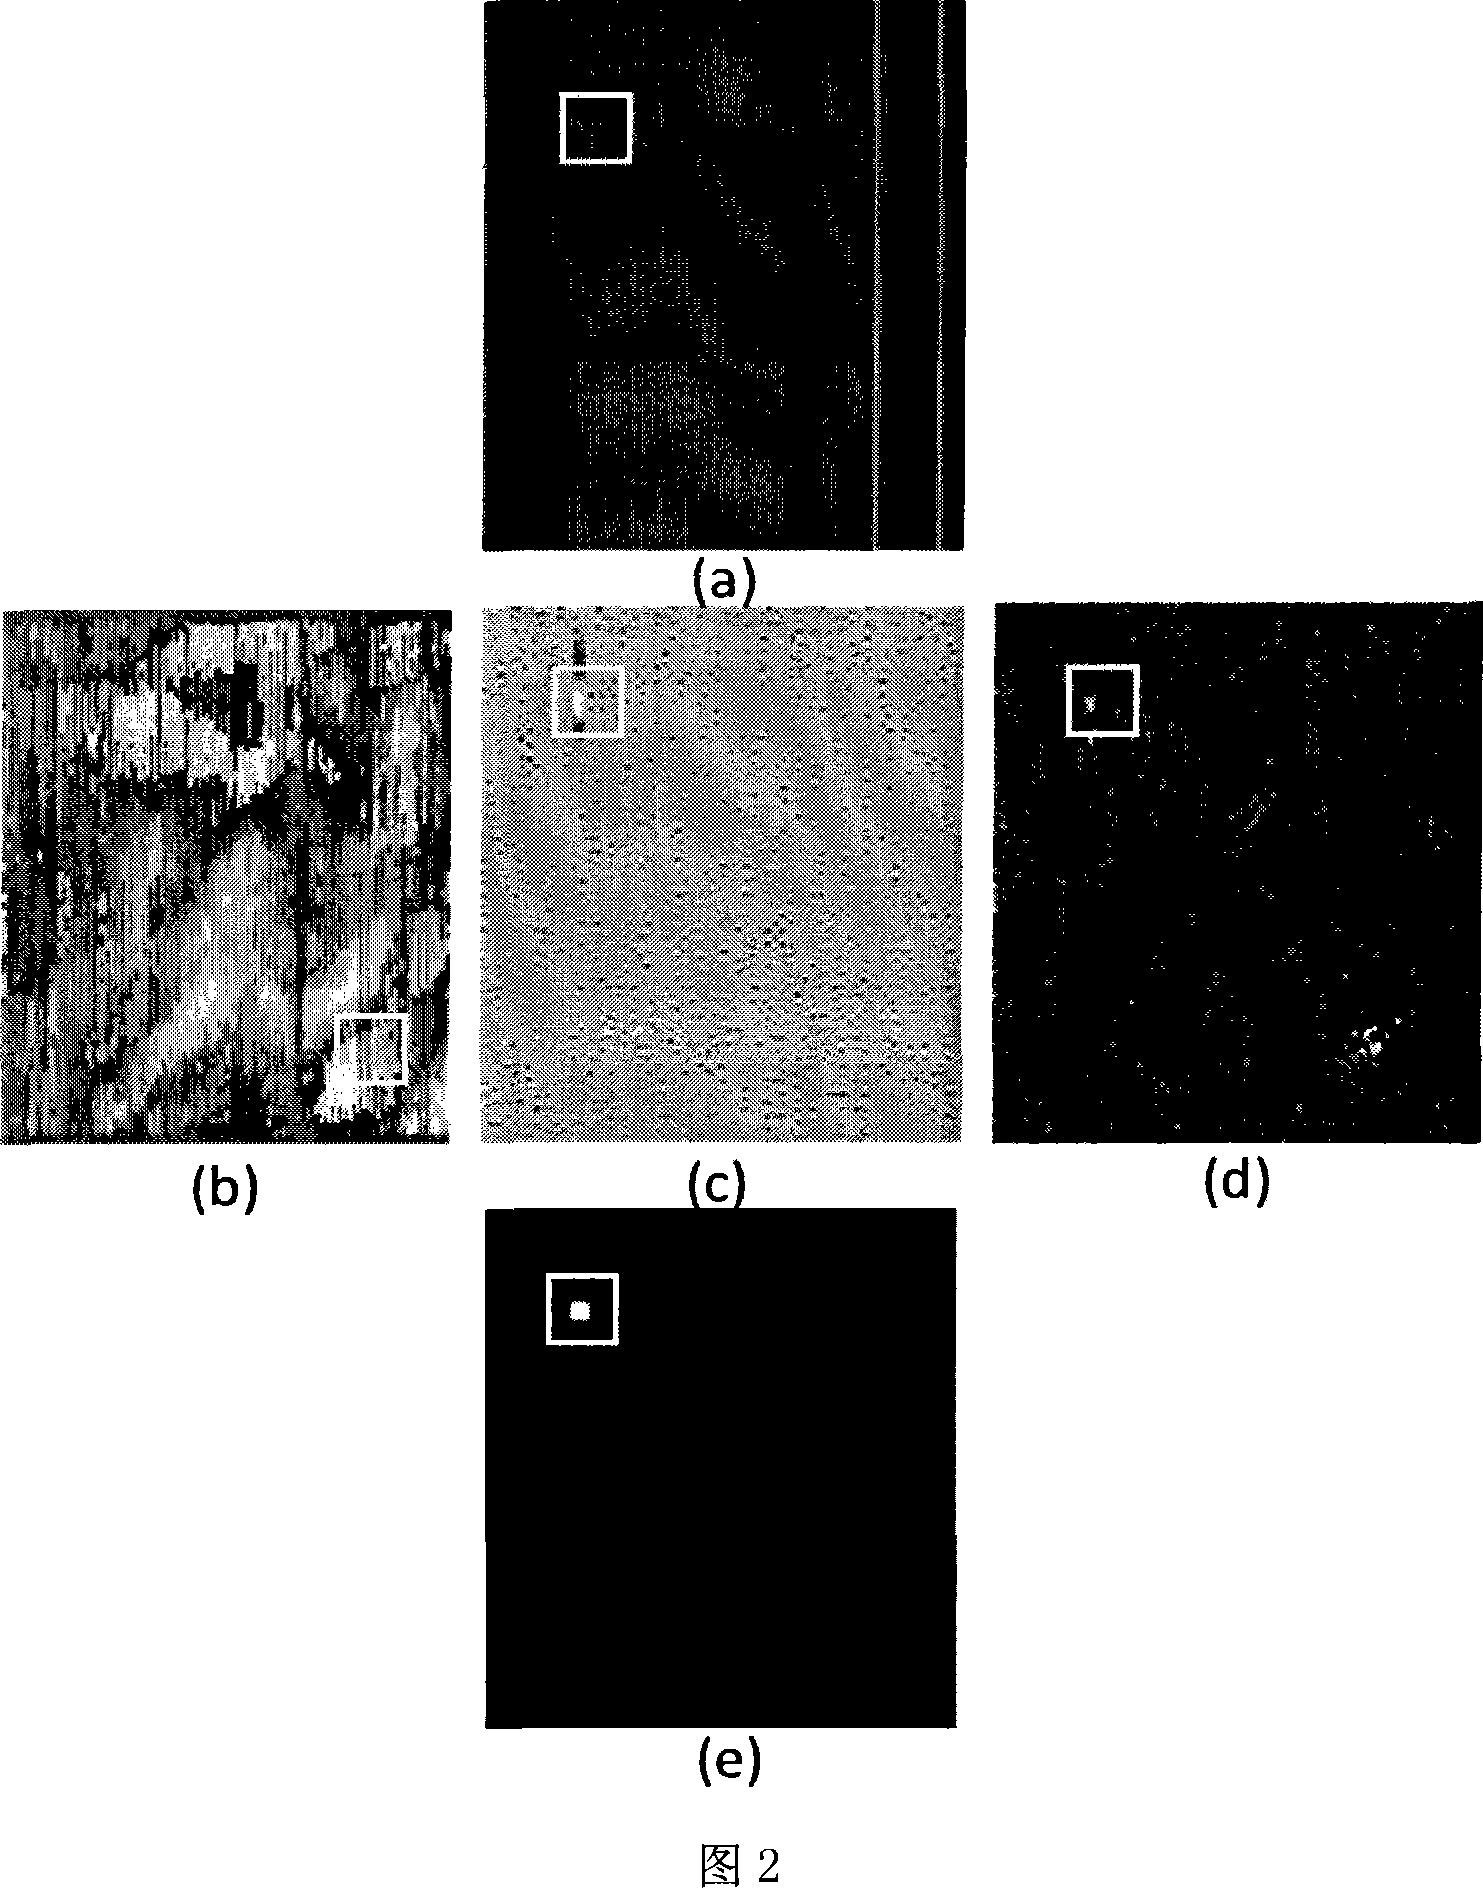 Row based weak target detection method in infra-red ray row detector image-forming